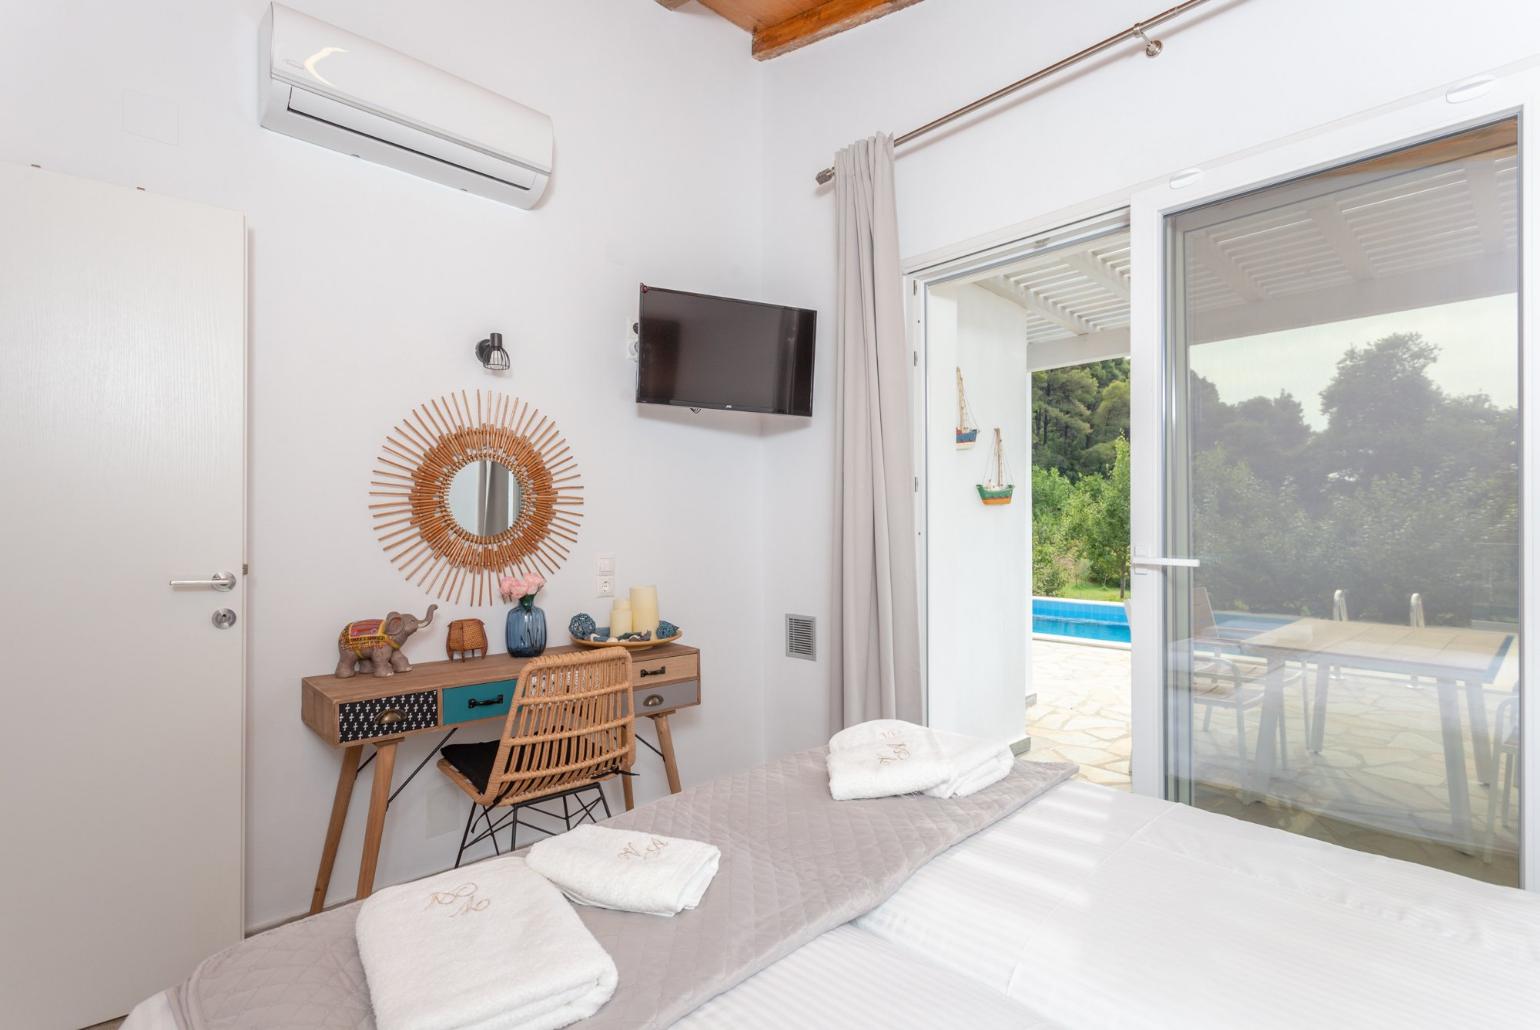 Twin bedroom on ground floor with A/C, TV, and pool terrace access